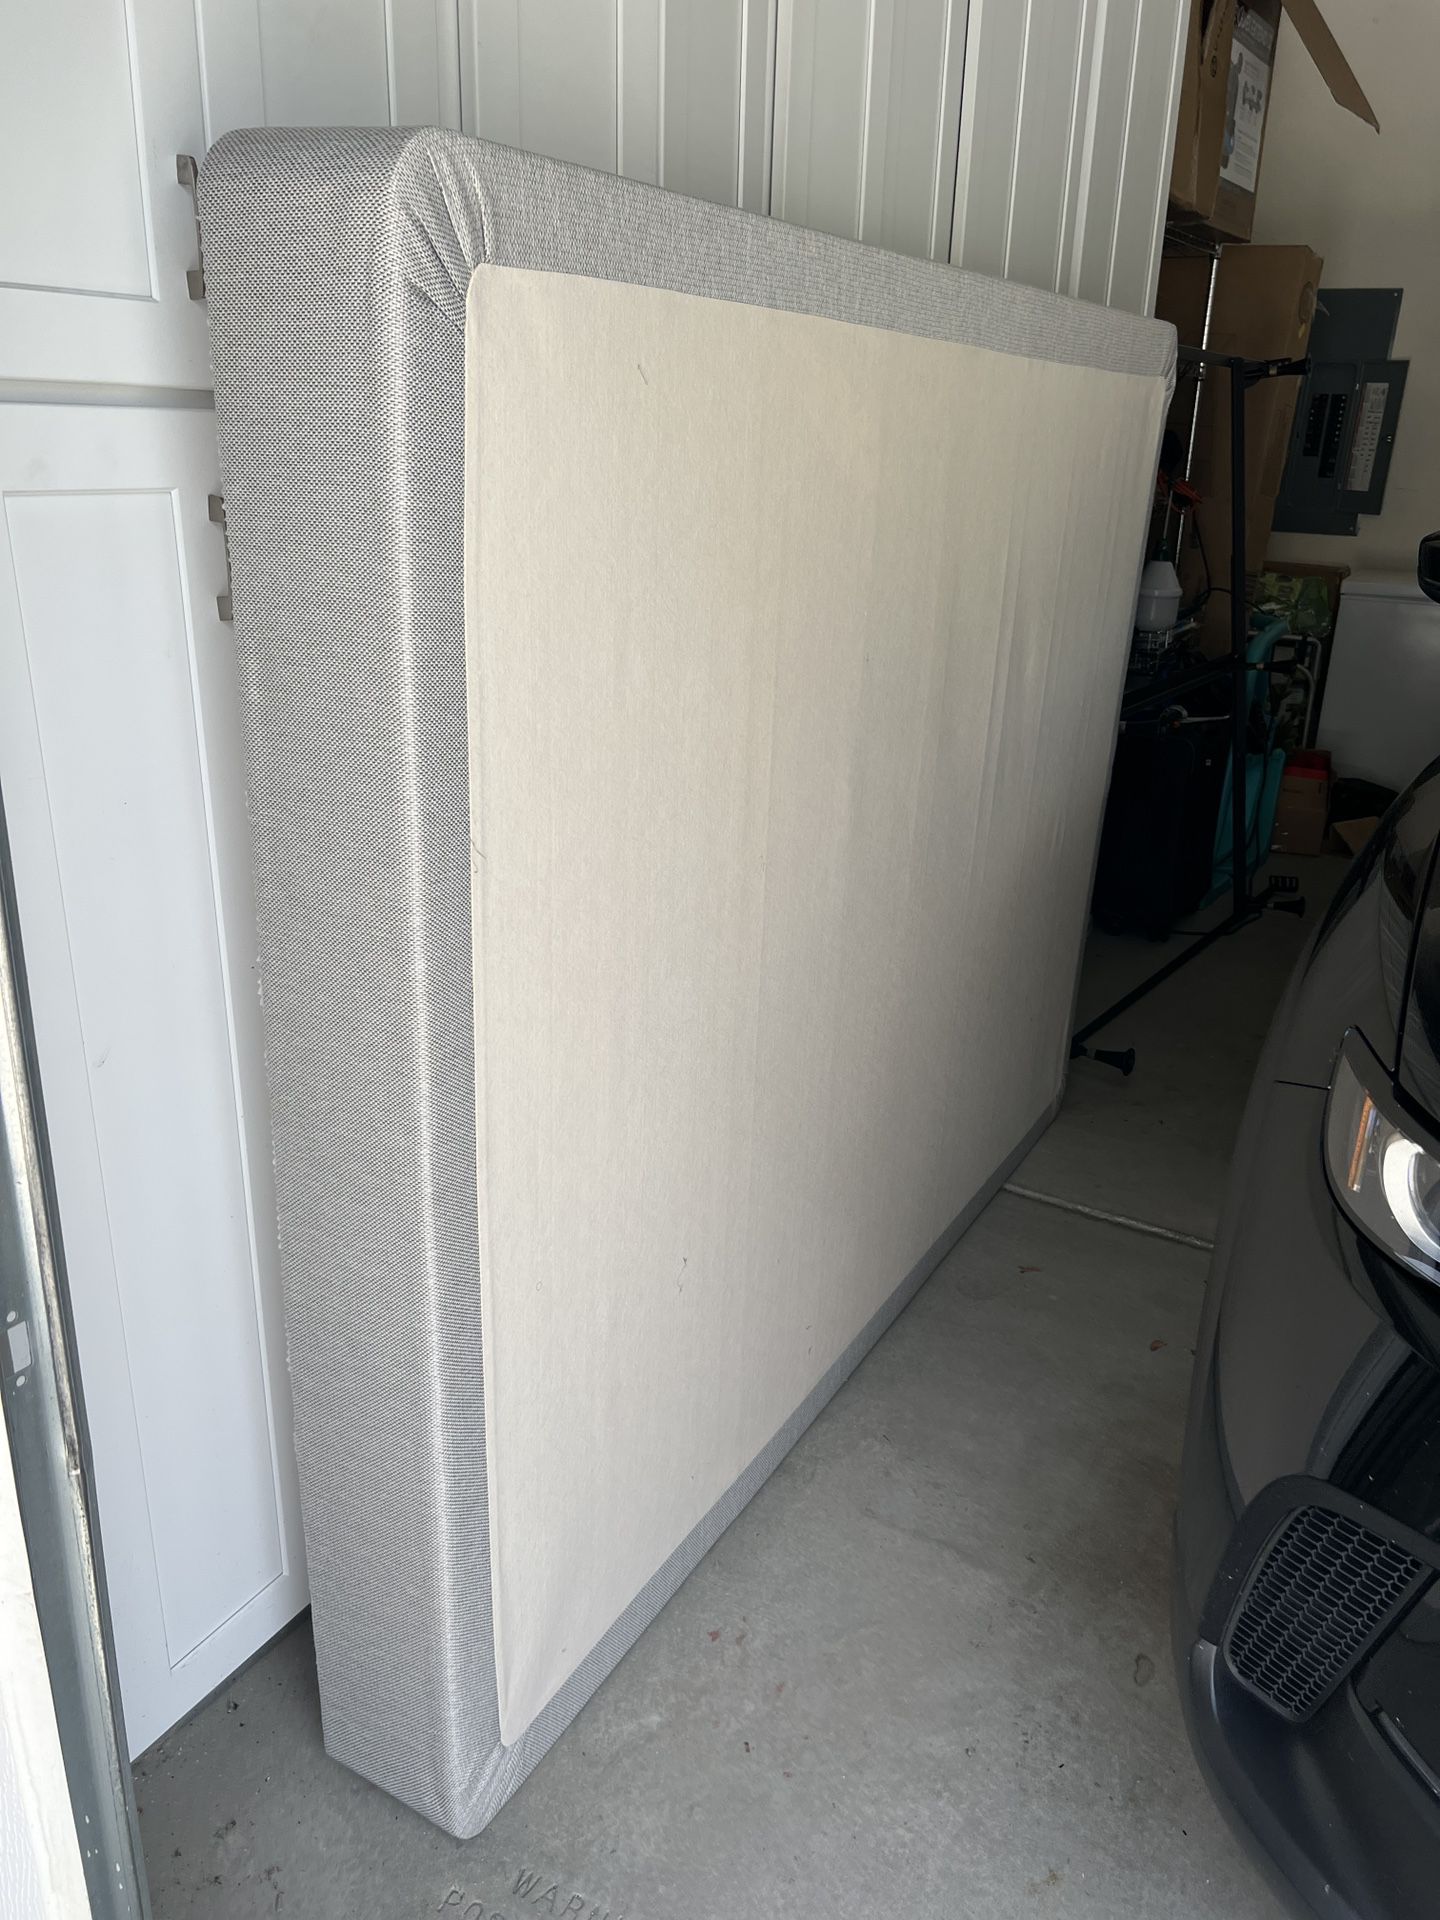 Free Queen box spring And frame